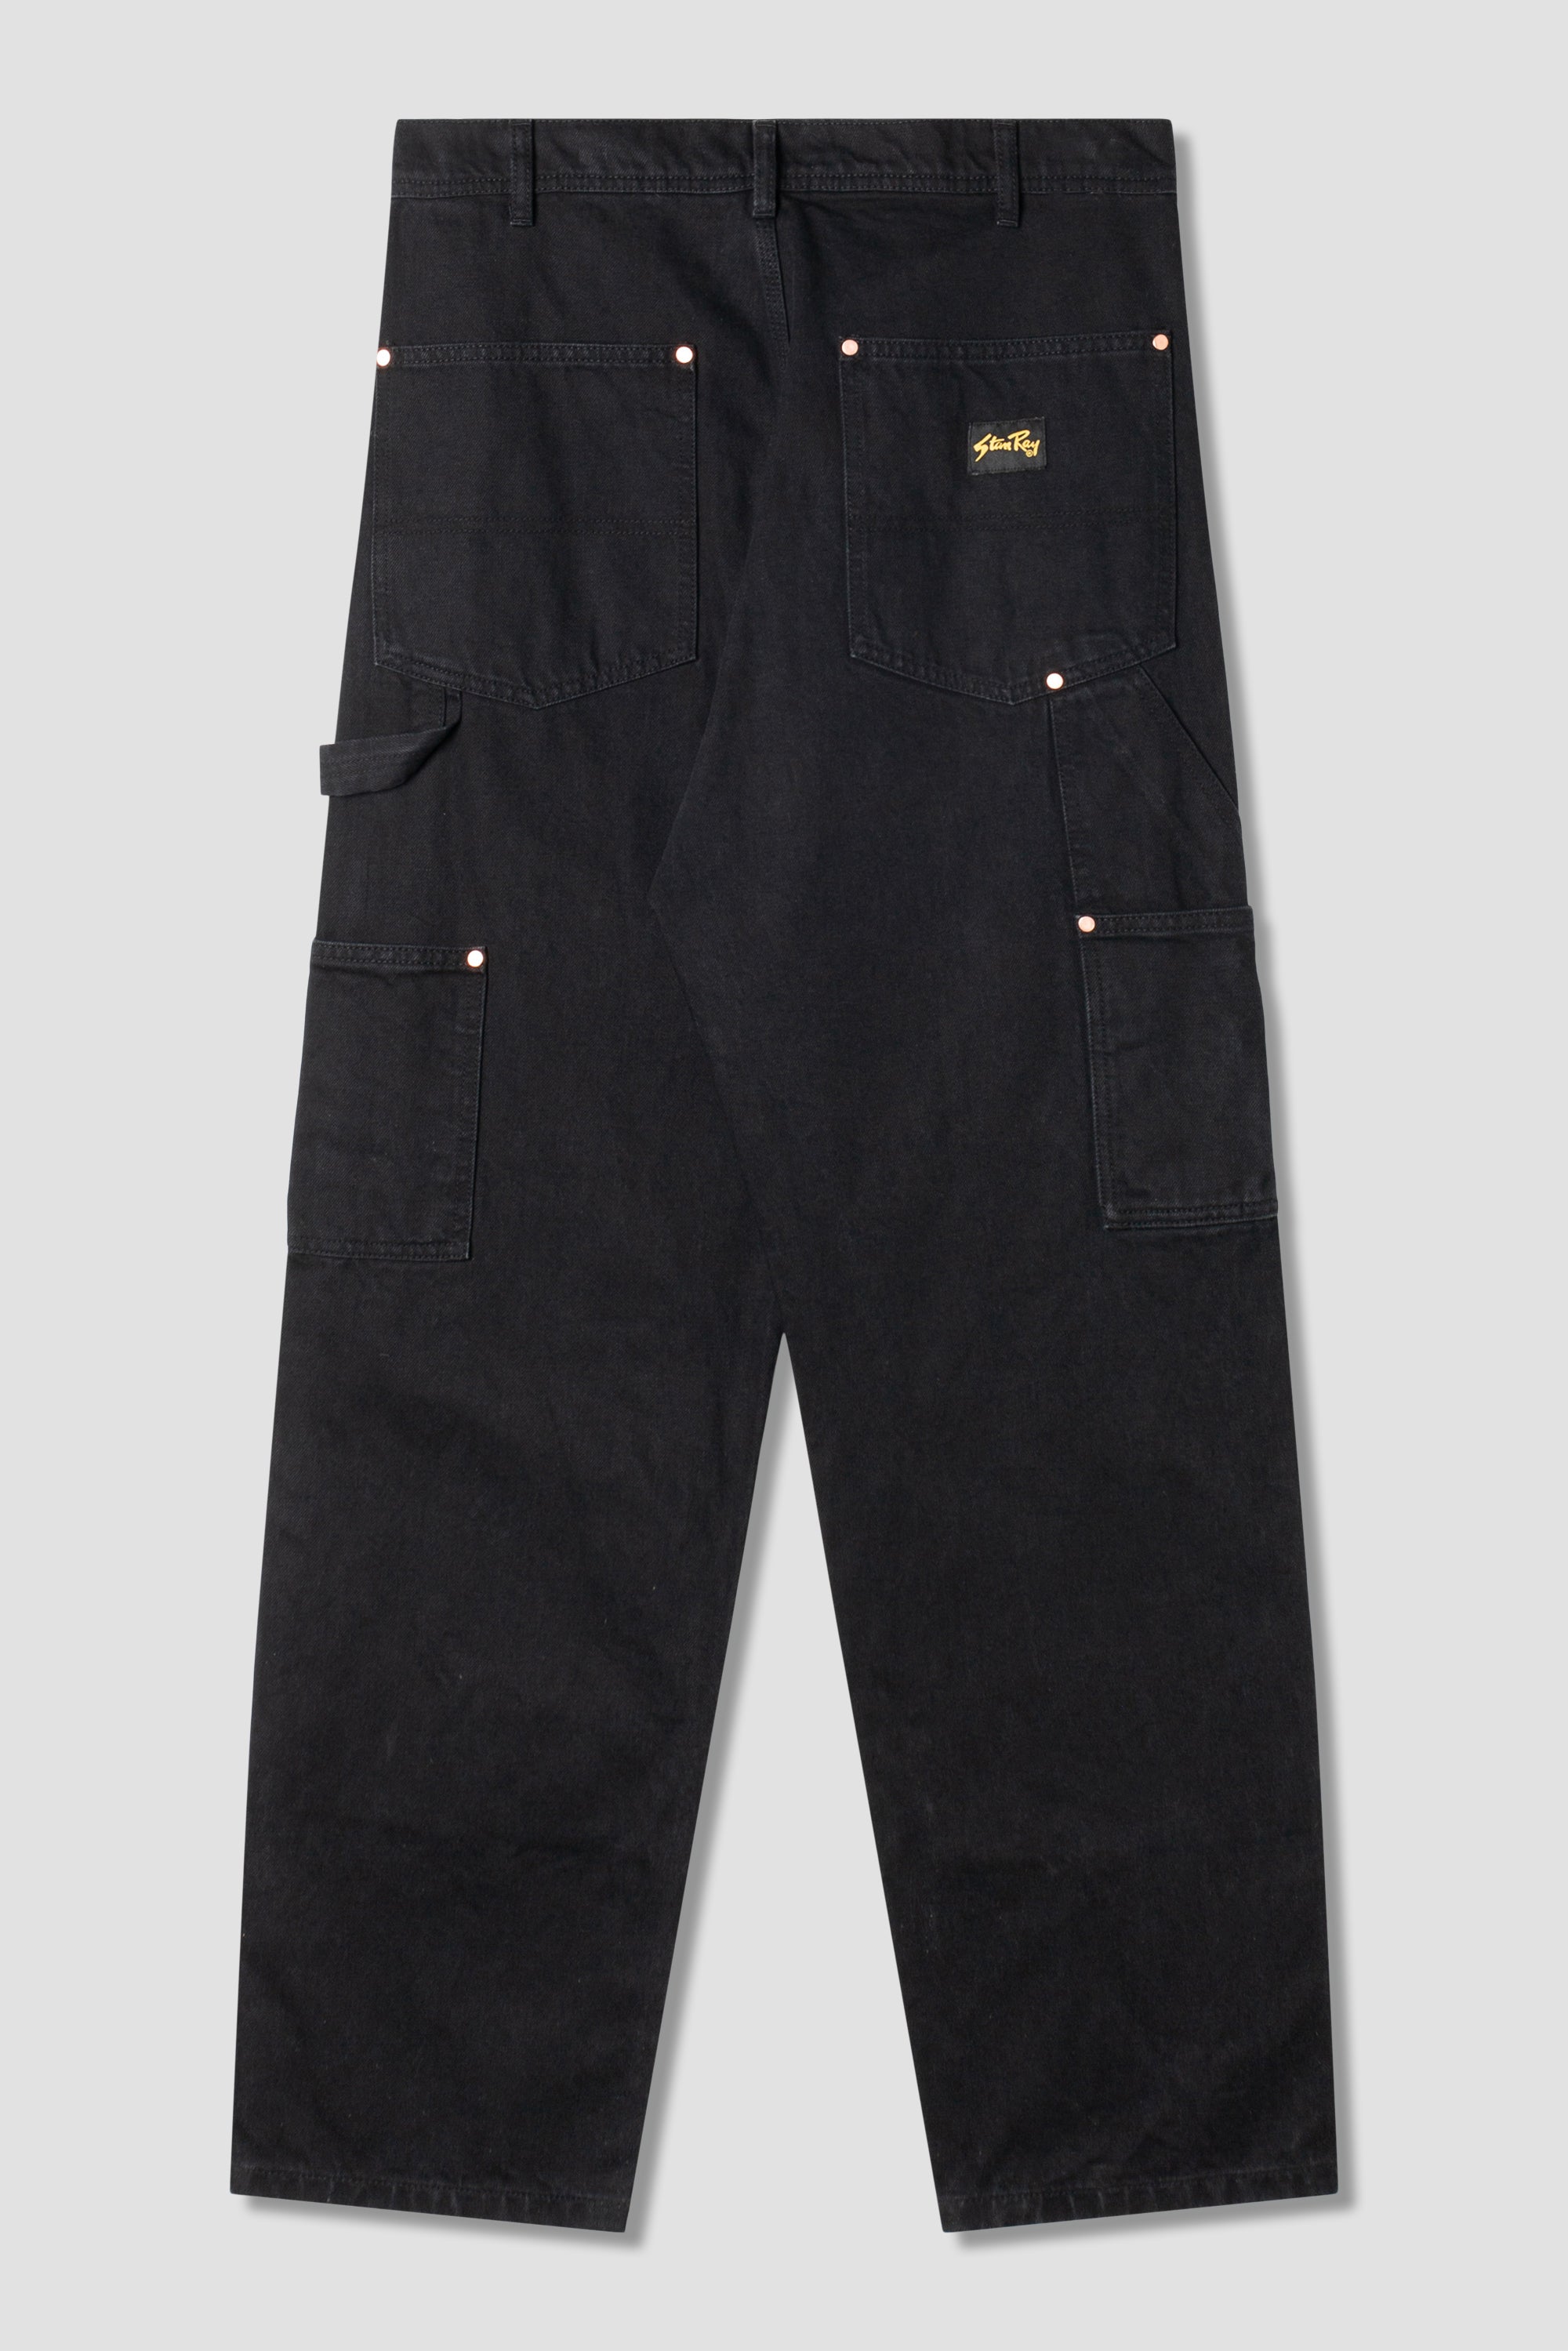 American Made Painter Pant Dungaree Jean Two Layers on Legs SECOND